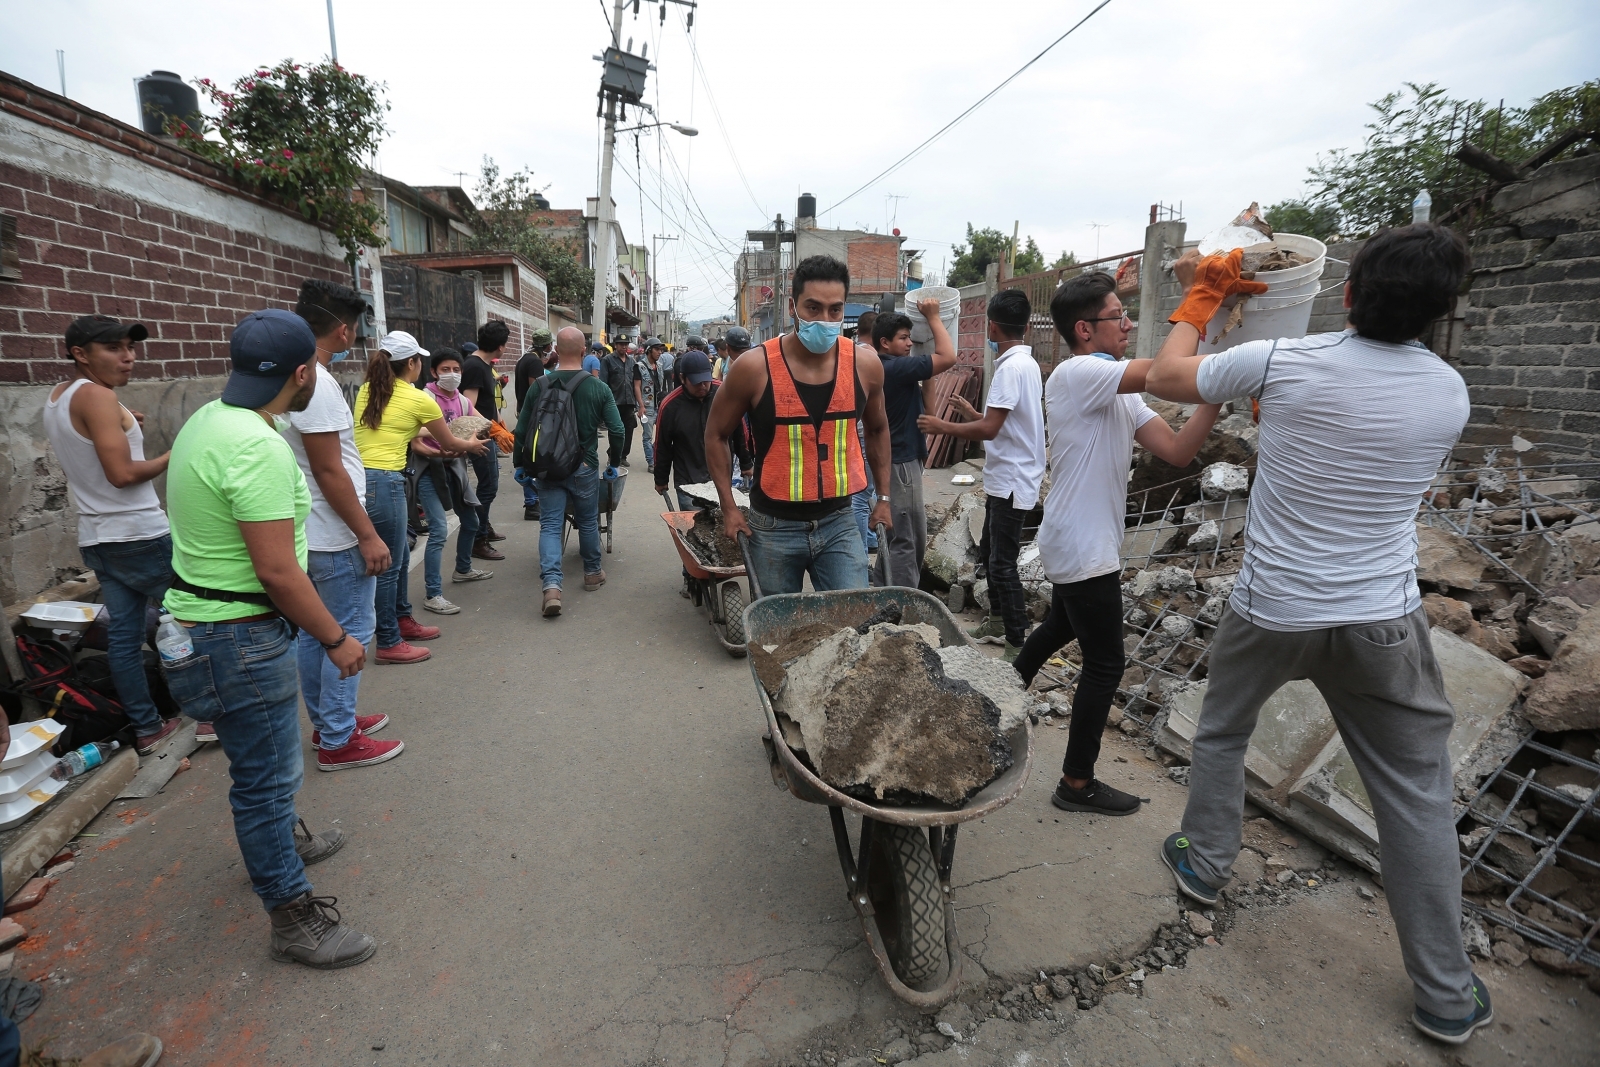 Rescue teams in Mexico work furiously to find survivors as earthquake ...